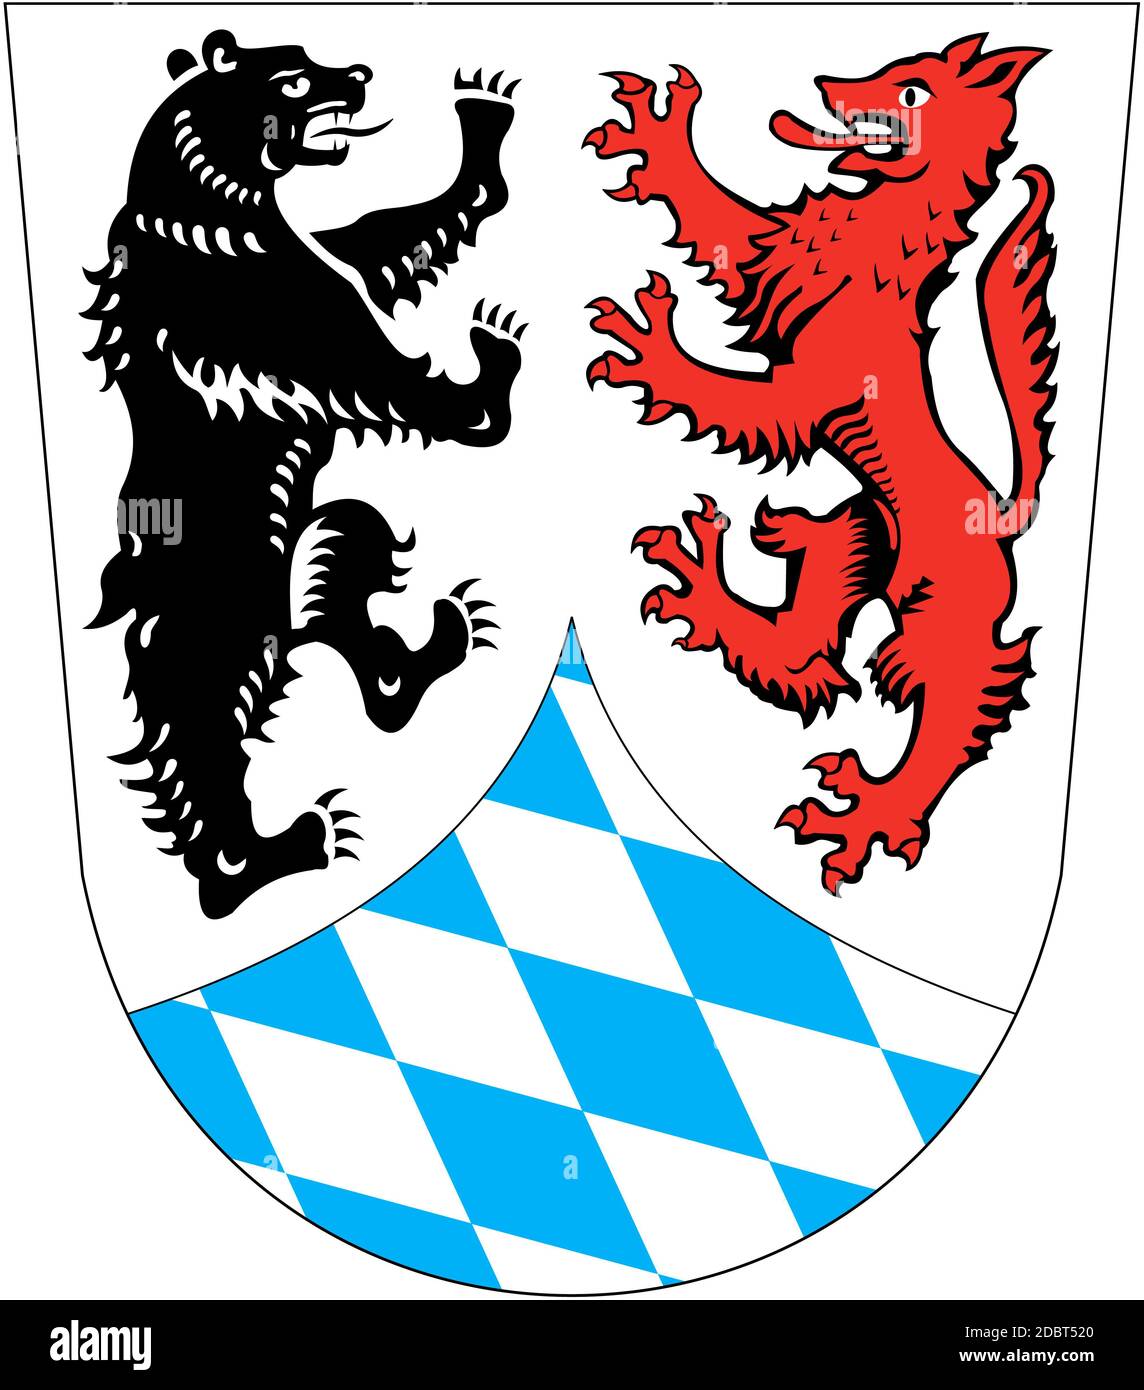 Coat of arms of the Freyung-Grafenau district. Germany Stock Photo